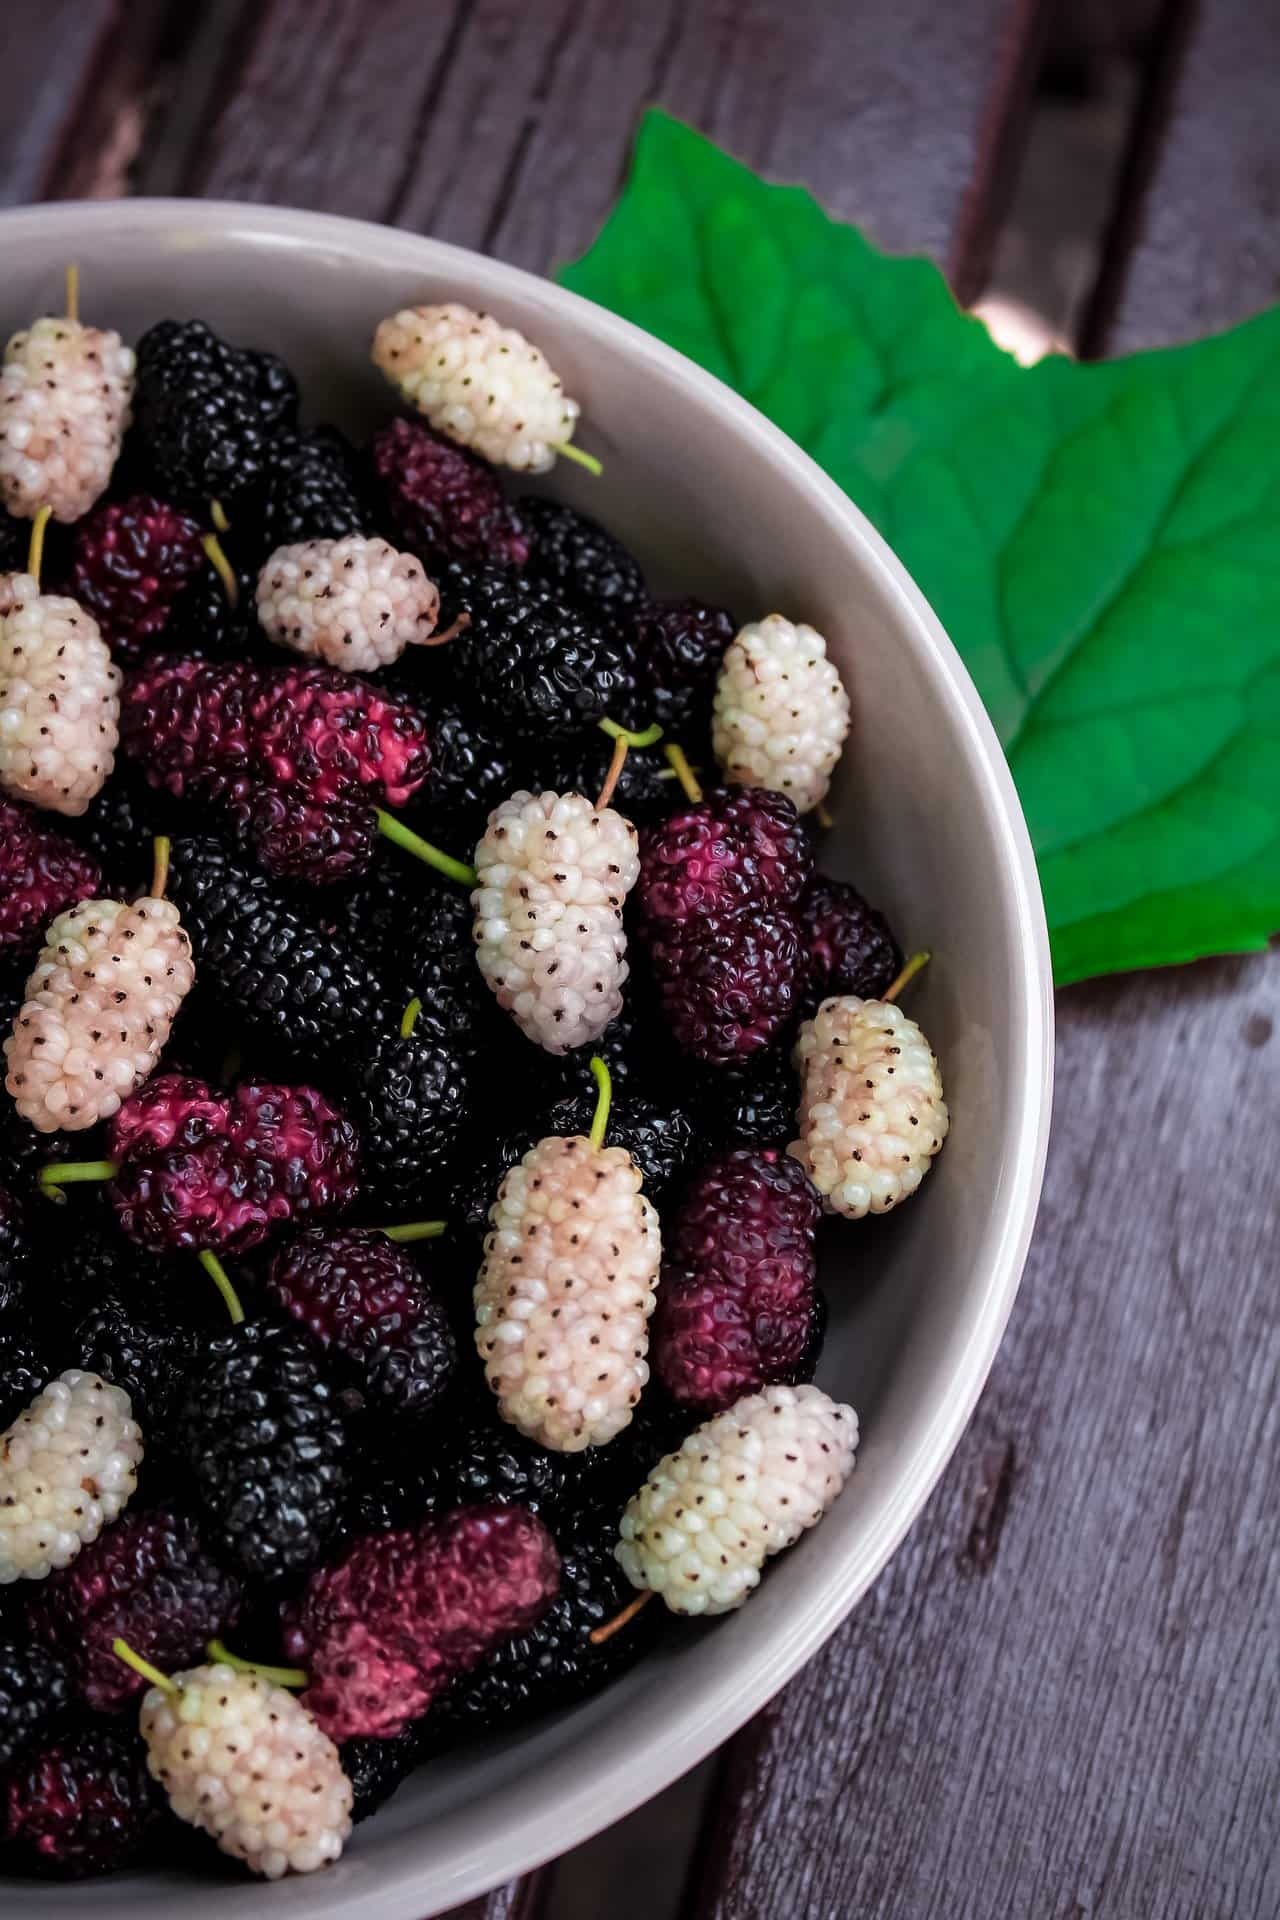 Mulberry health benefits, Nutritional powerhouse, Nature's superfood, Boosts well-being, 1280x1920 HD Phone